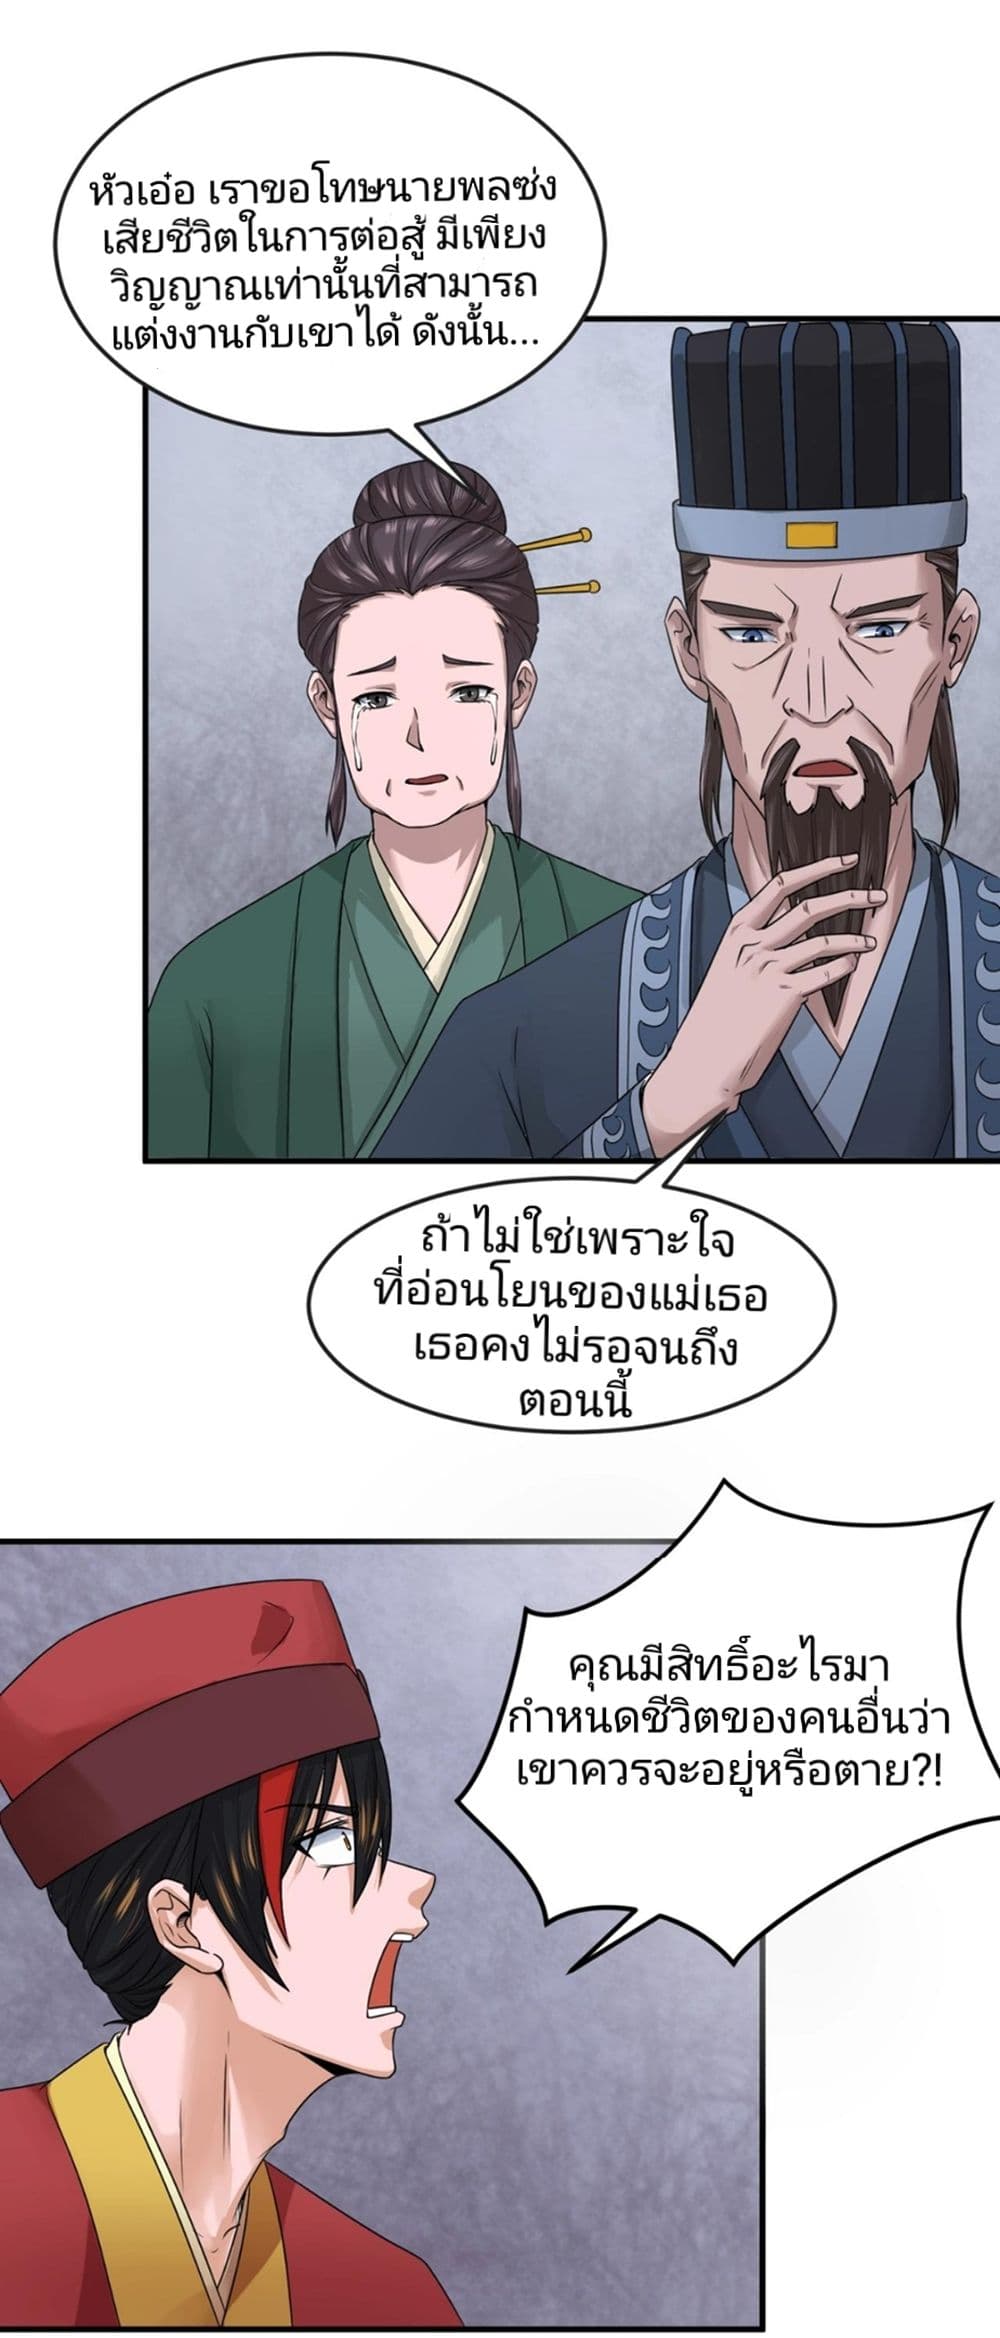 The Age of Ghost Spirits à¸à¸­à¸à¸à¸µà¹ 15 (15)